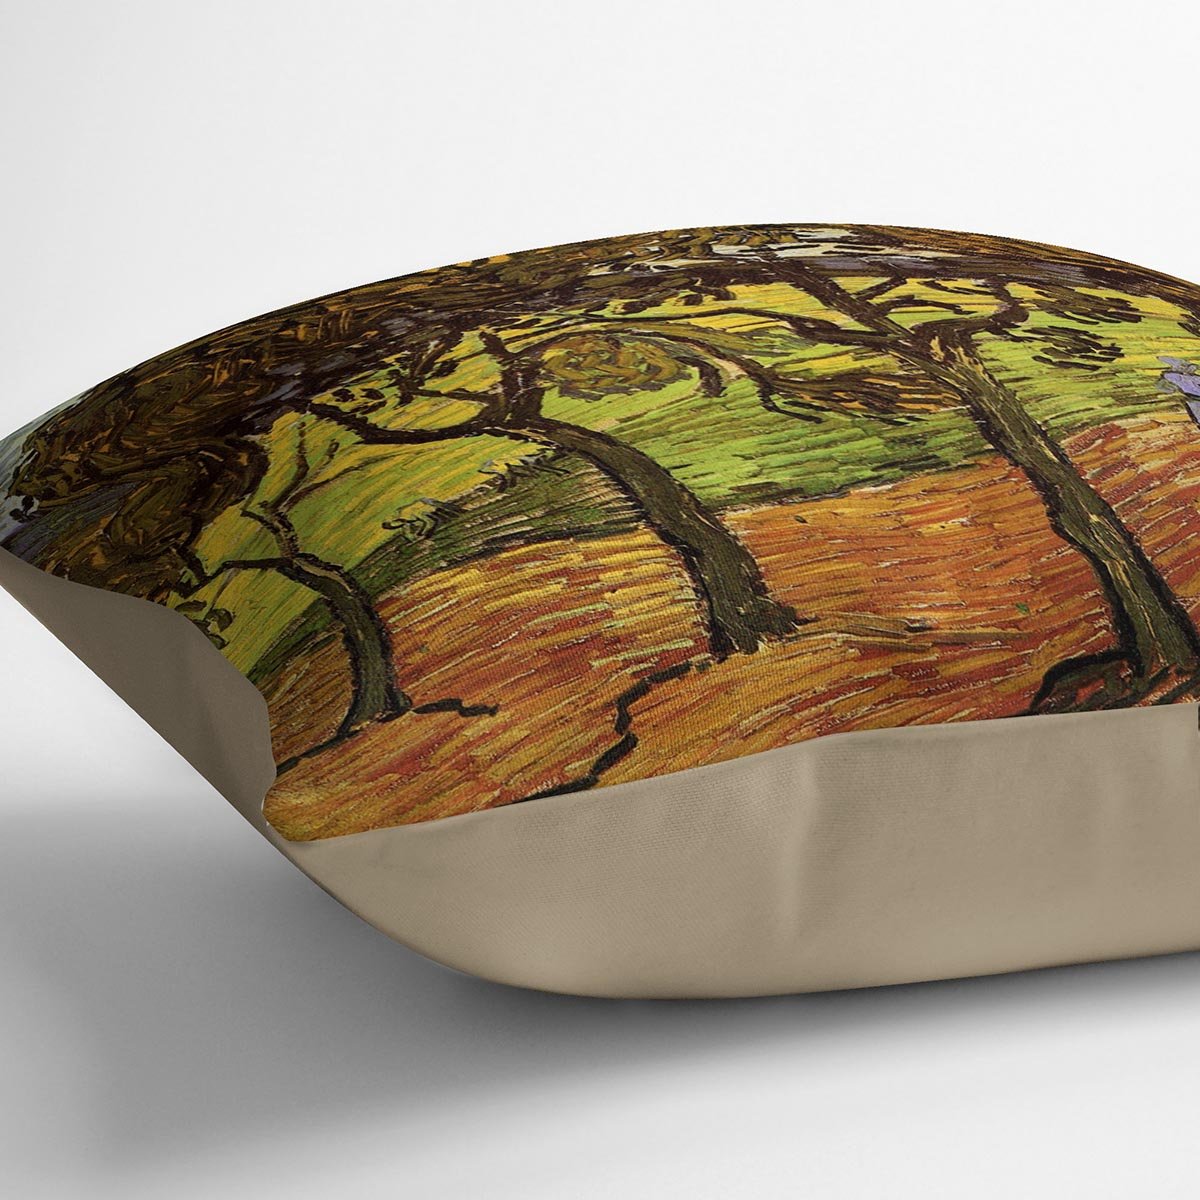 Landscape with Trees and Figures by Van Gogh Throw Pillow